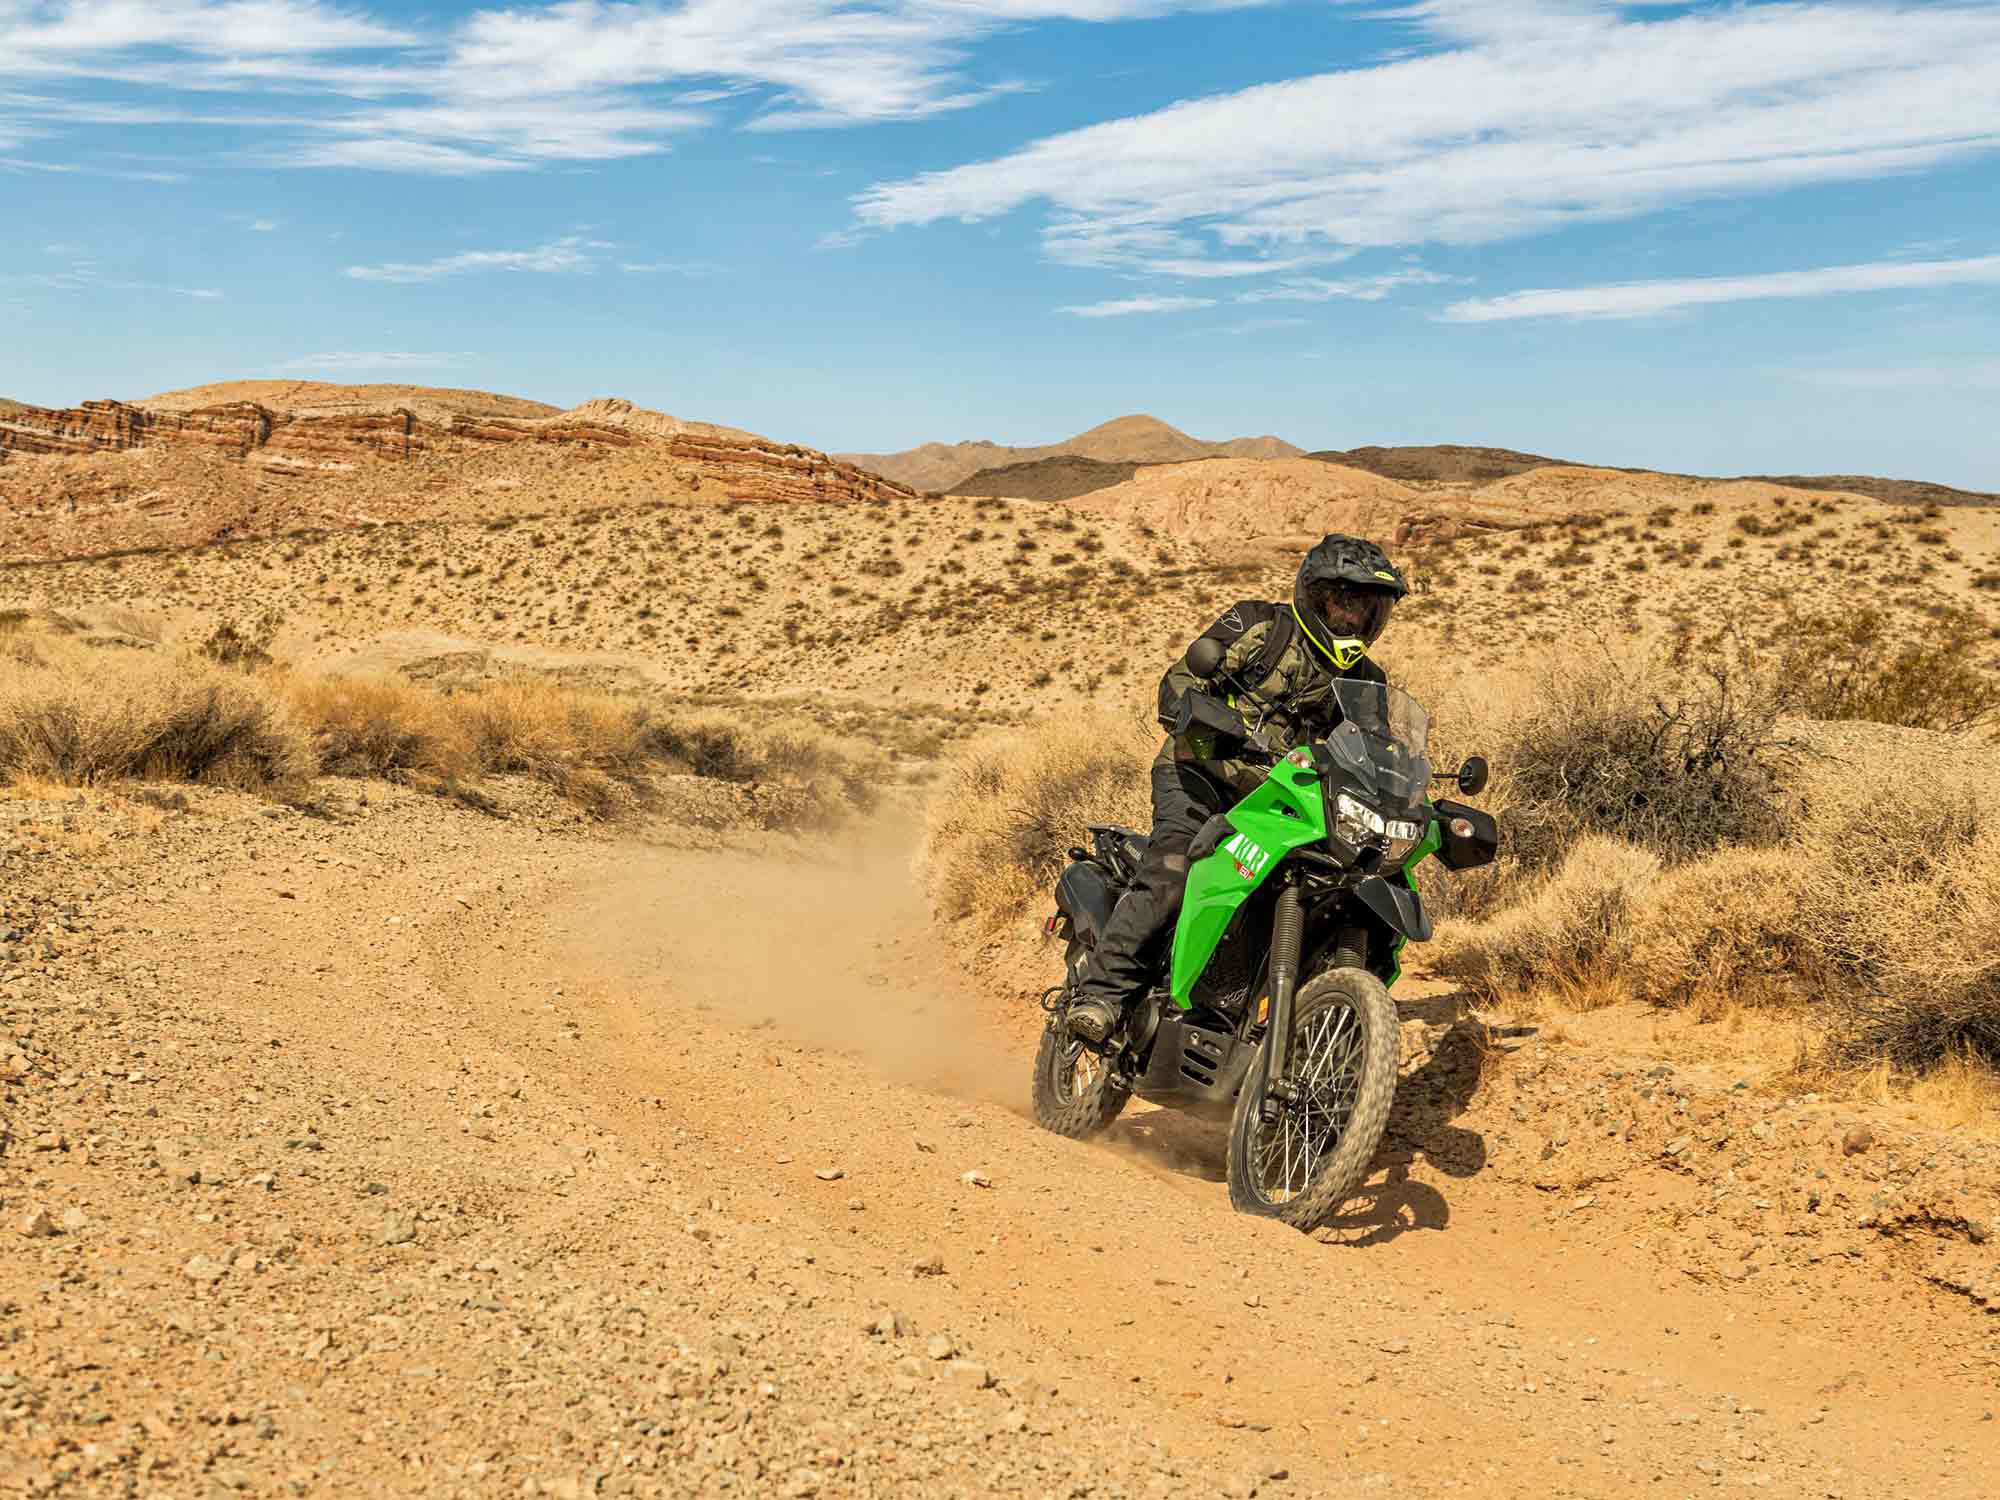 The bulk of what makes the KLR a capable off-road ride remains: 21- and 17-inch tube-type tires, spark arrestor–equipped exhaust, rigid steel frame, and 652cc single-cylinder engine.